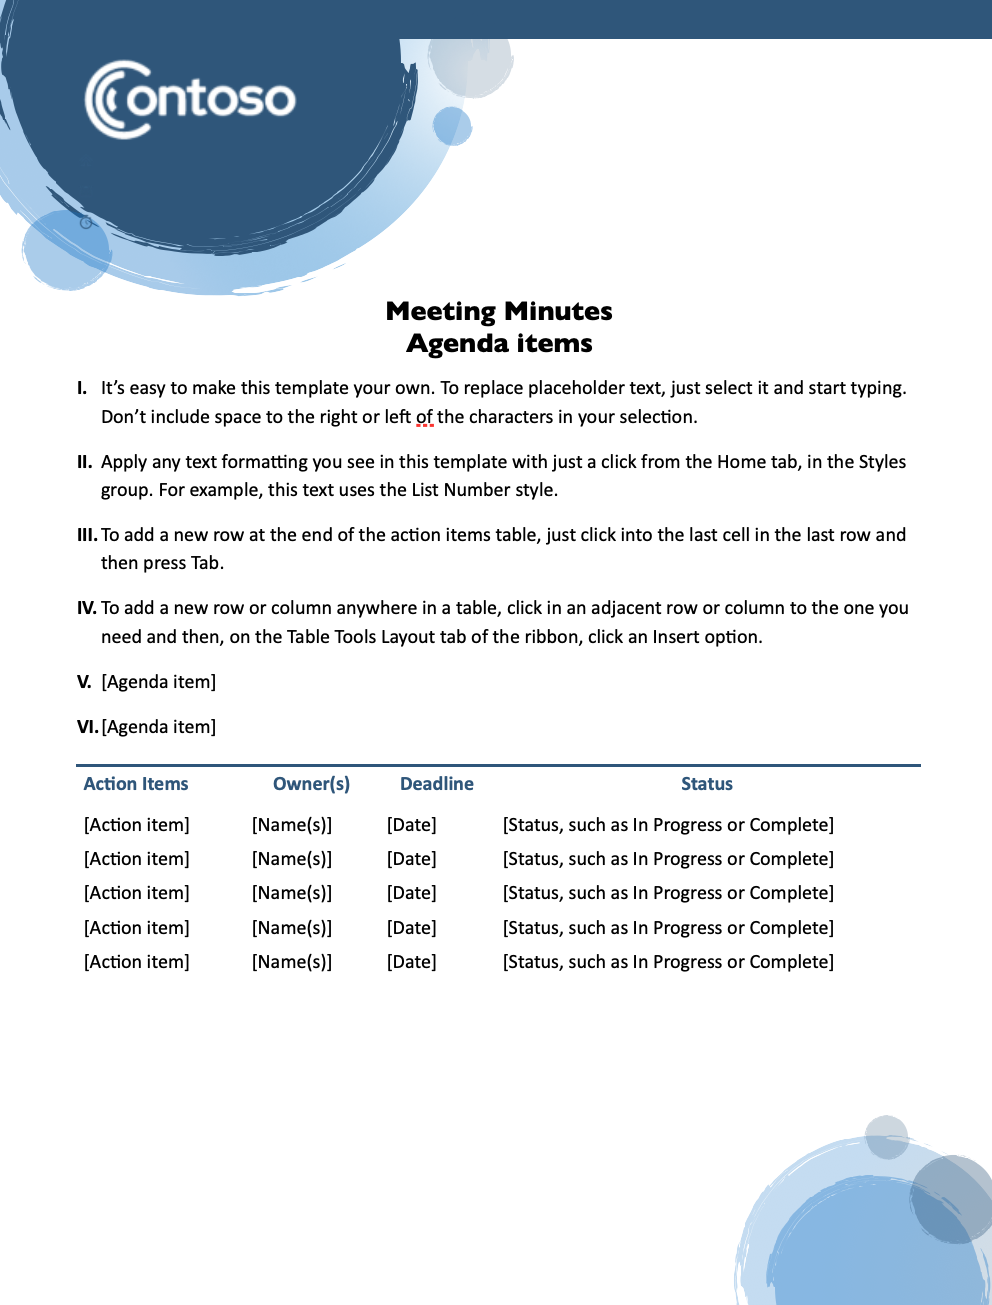 meeting minutes template from Contoso